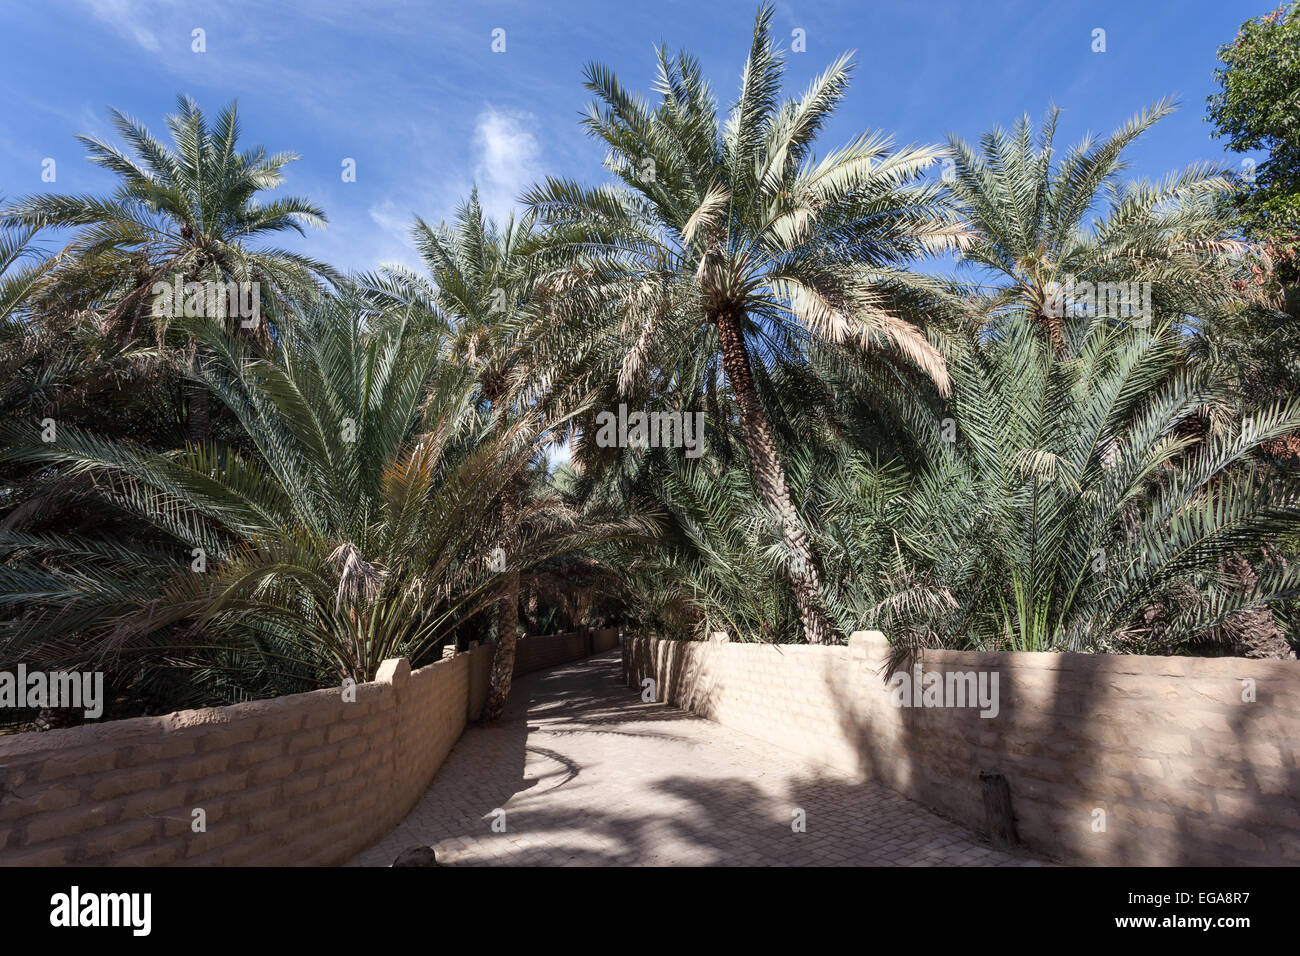 Abu Dhabi researchers trace the date palms origins - The 